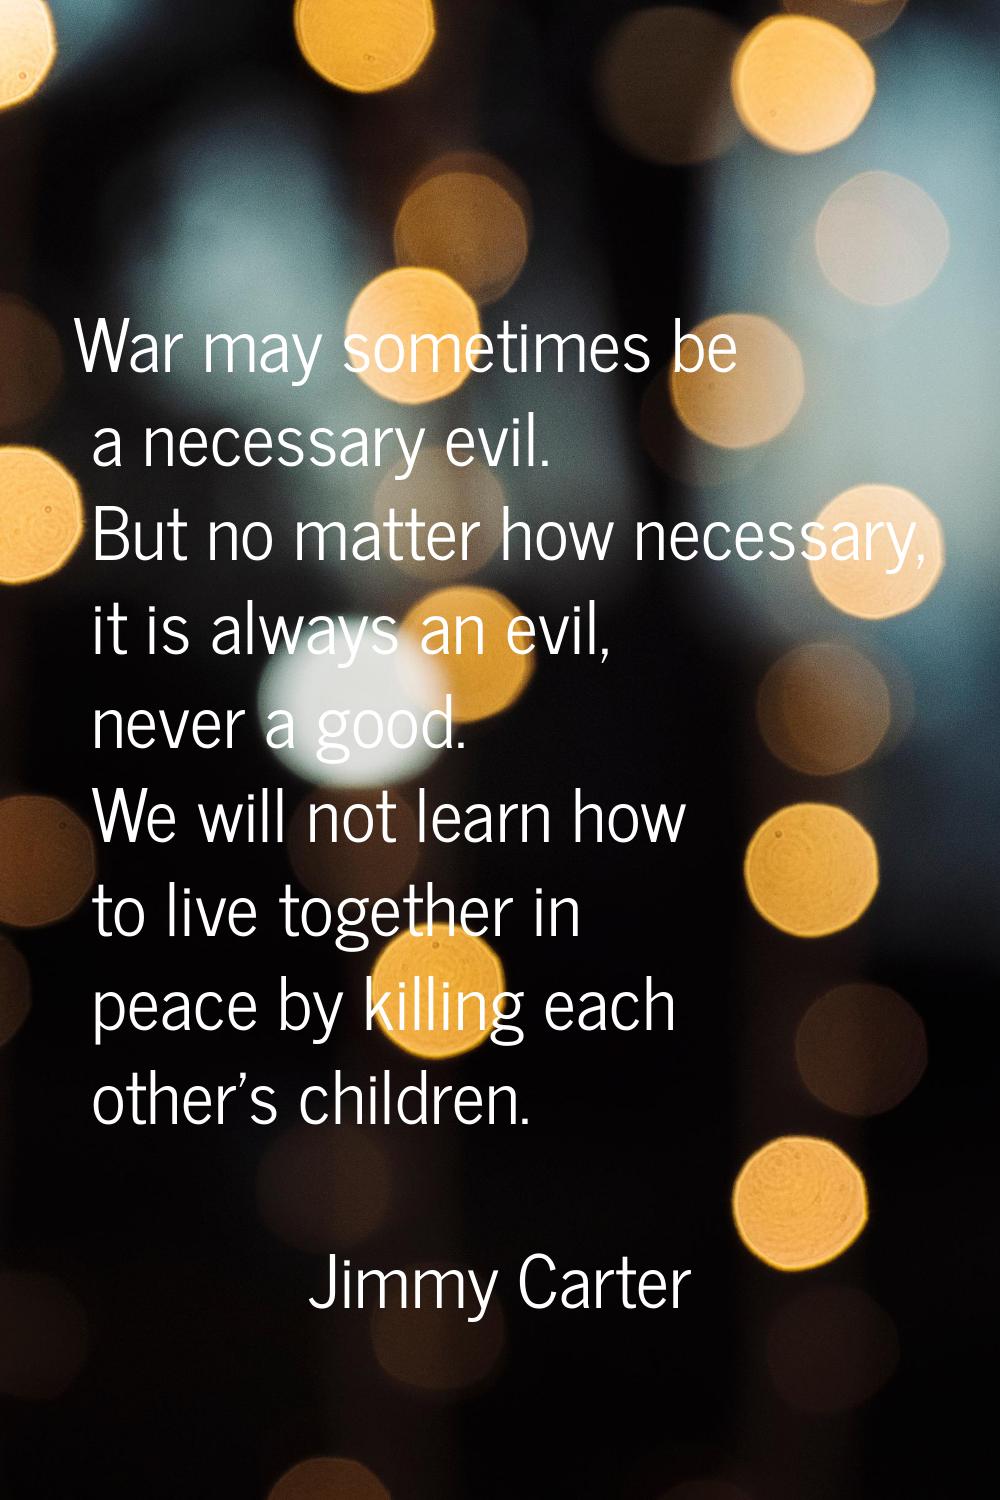 War may sometimes be a necessary evil. But no matter how necessary, it is always an evil, never a g